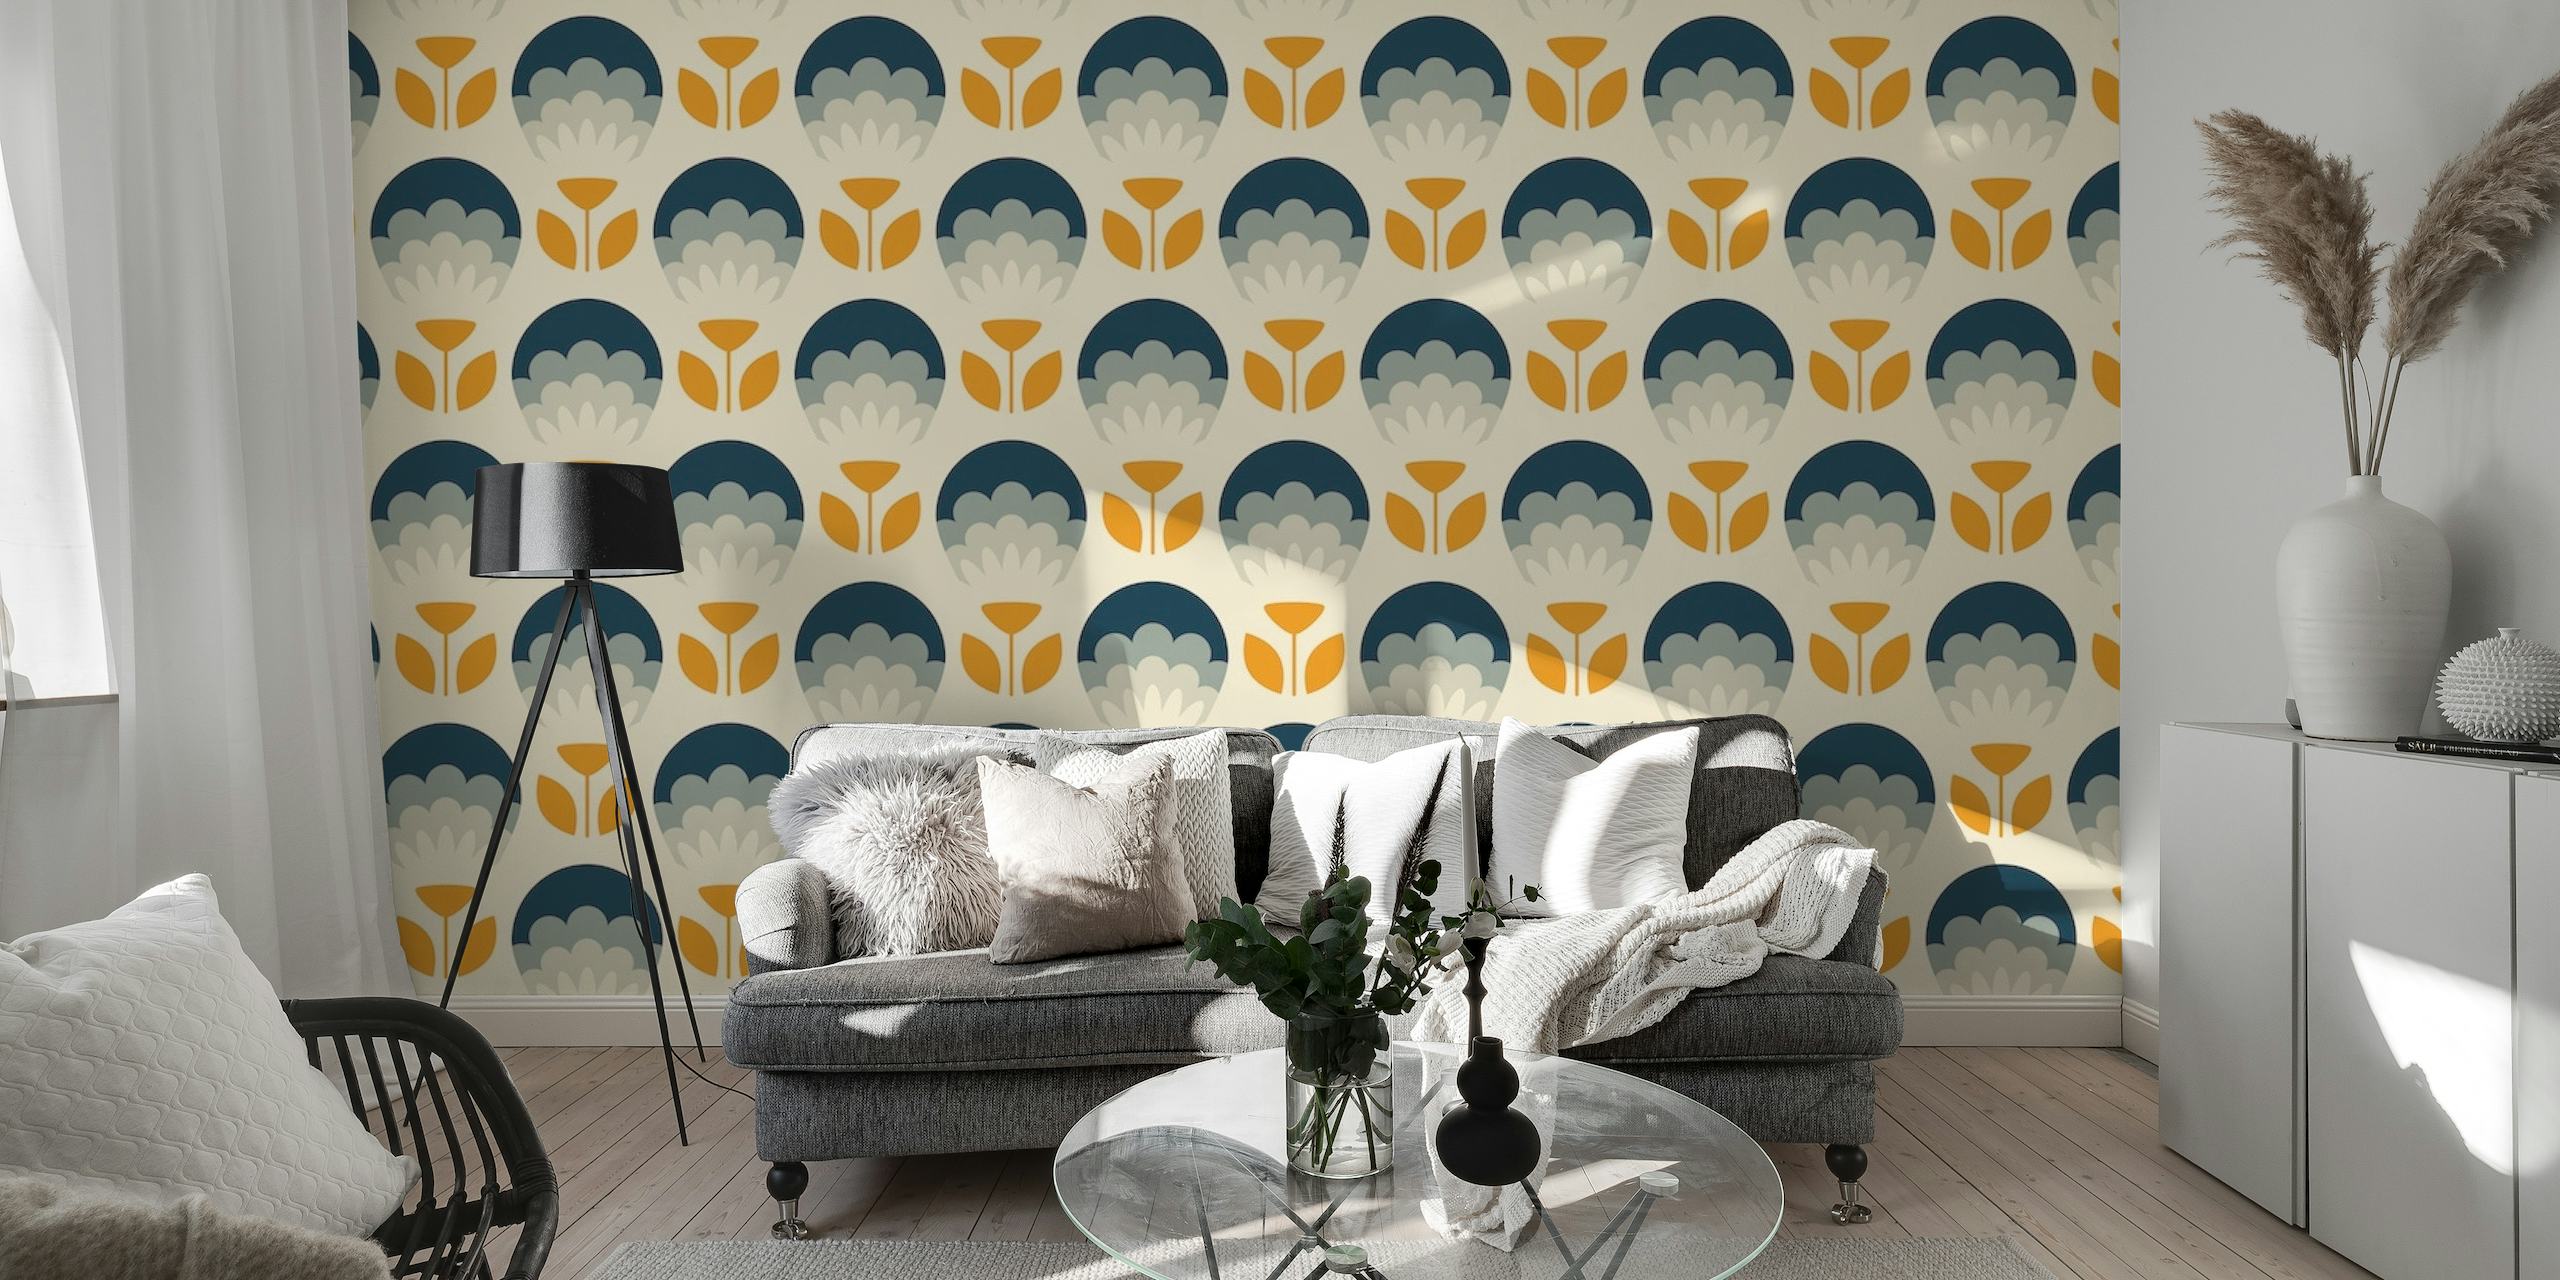 Vintage-inspired retro flowers pattern wall mural with a blend of warm and neutral colors